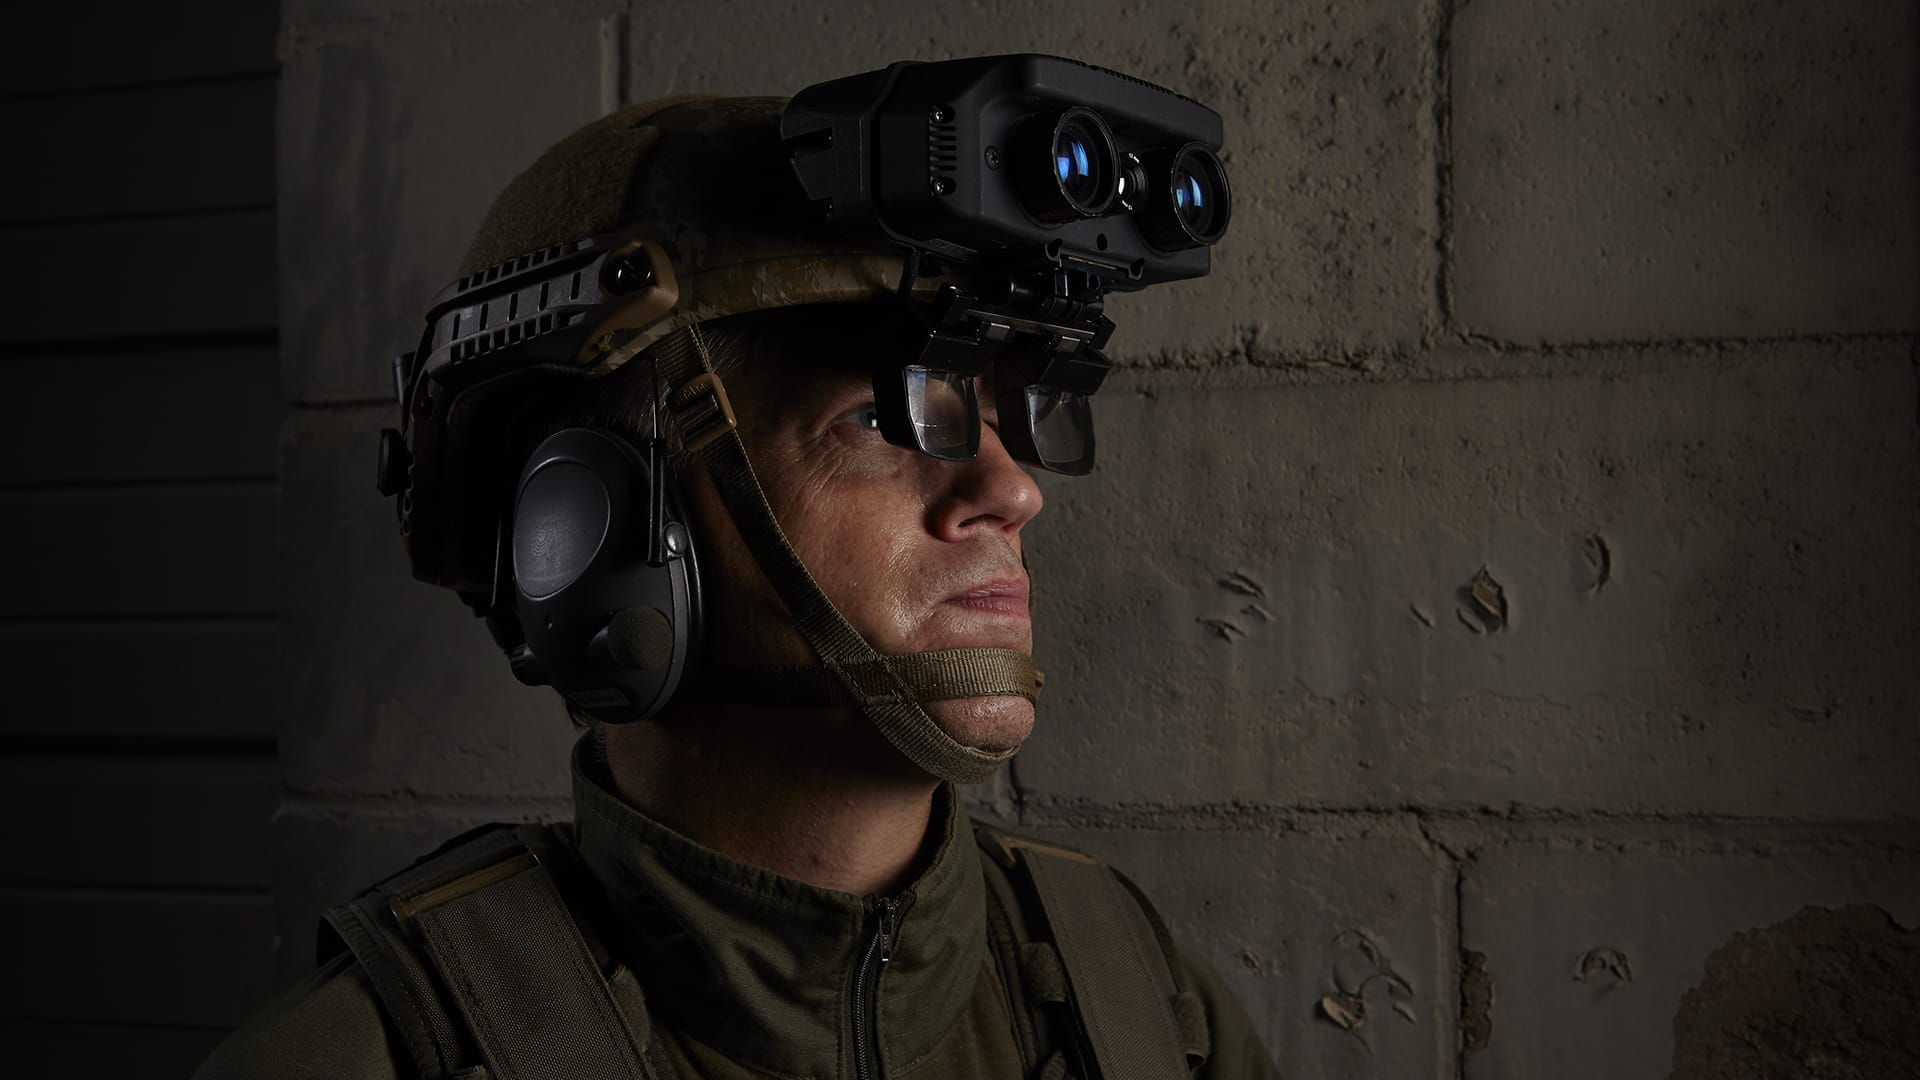 Ground solider wearing an Integrated Digital Video System helmet mounted display from Collins Aerospace